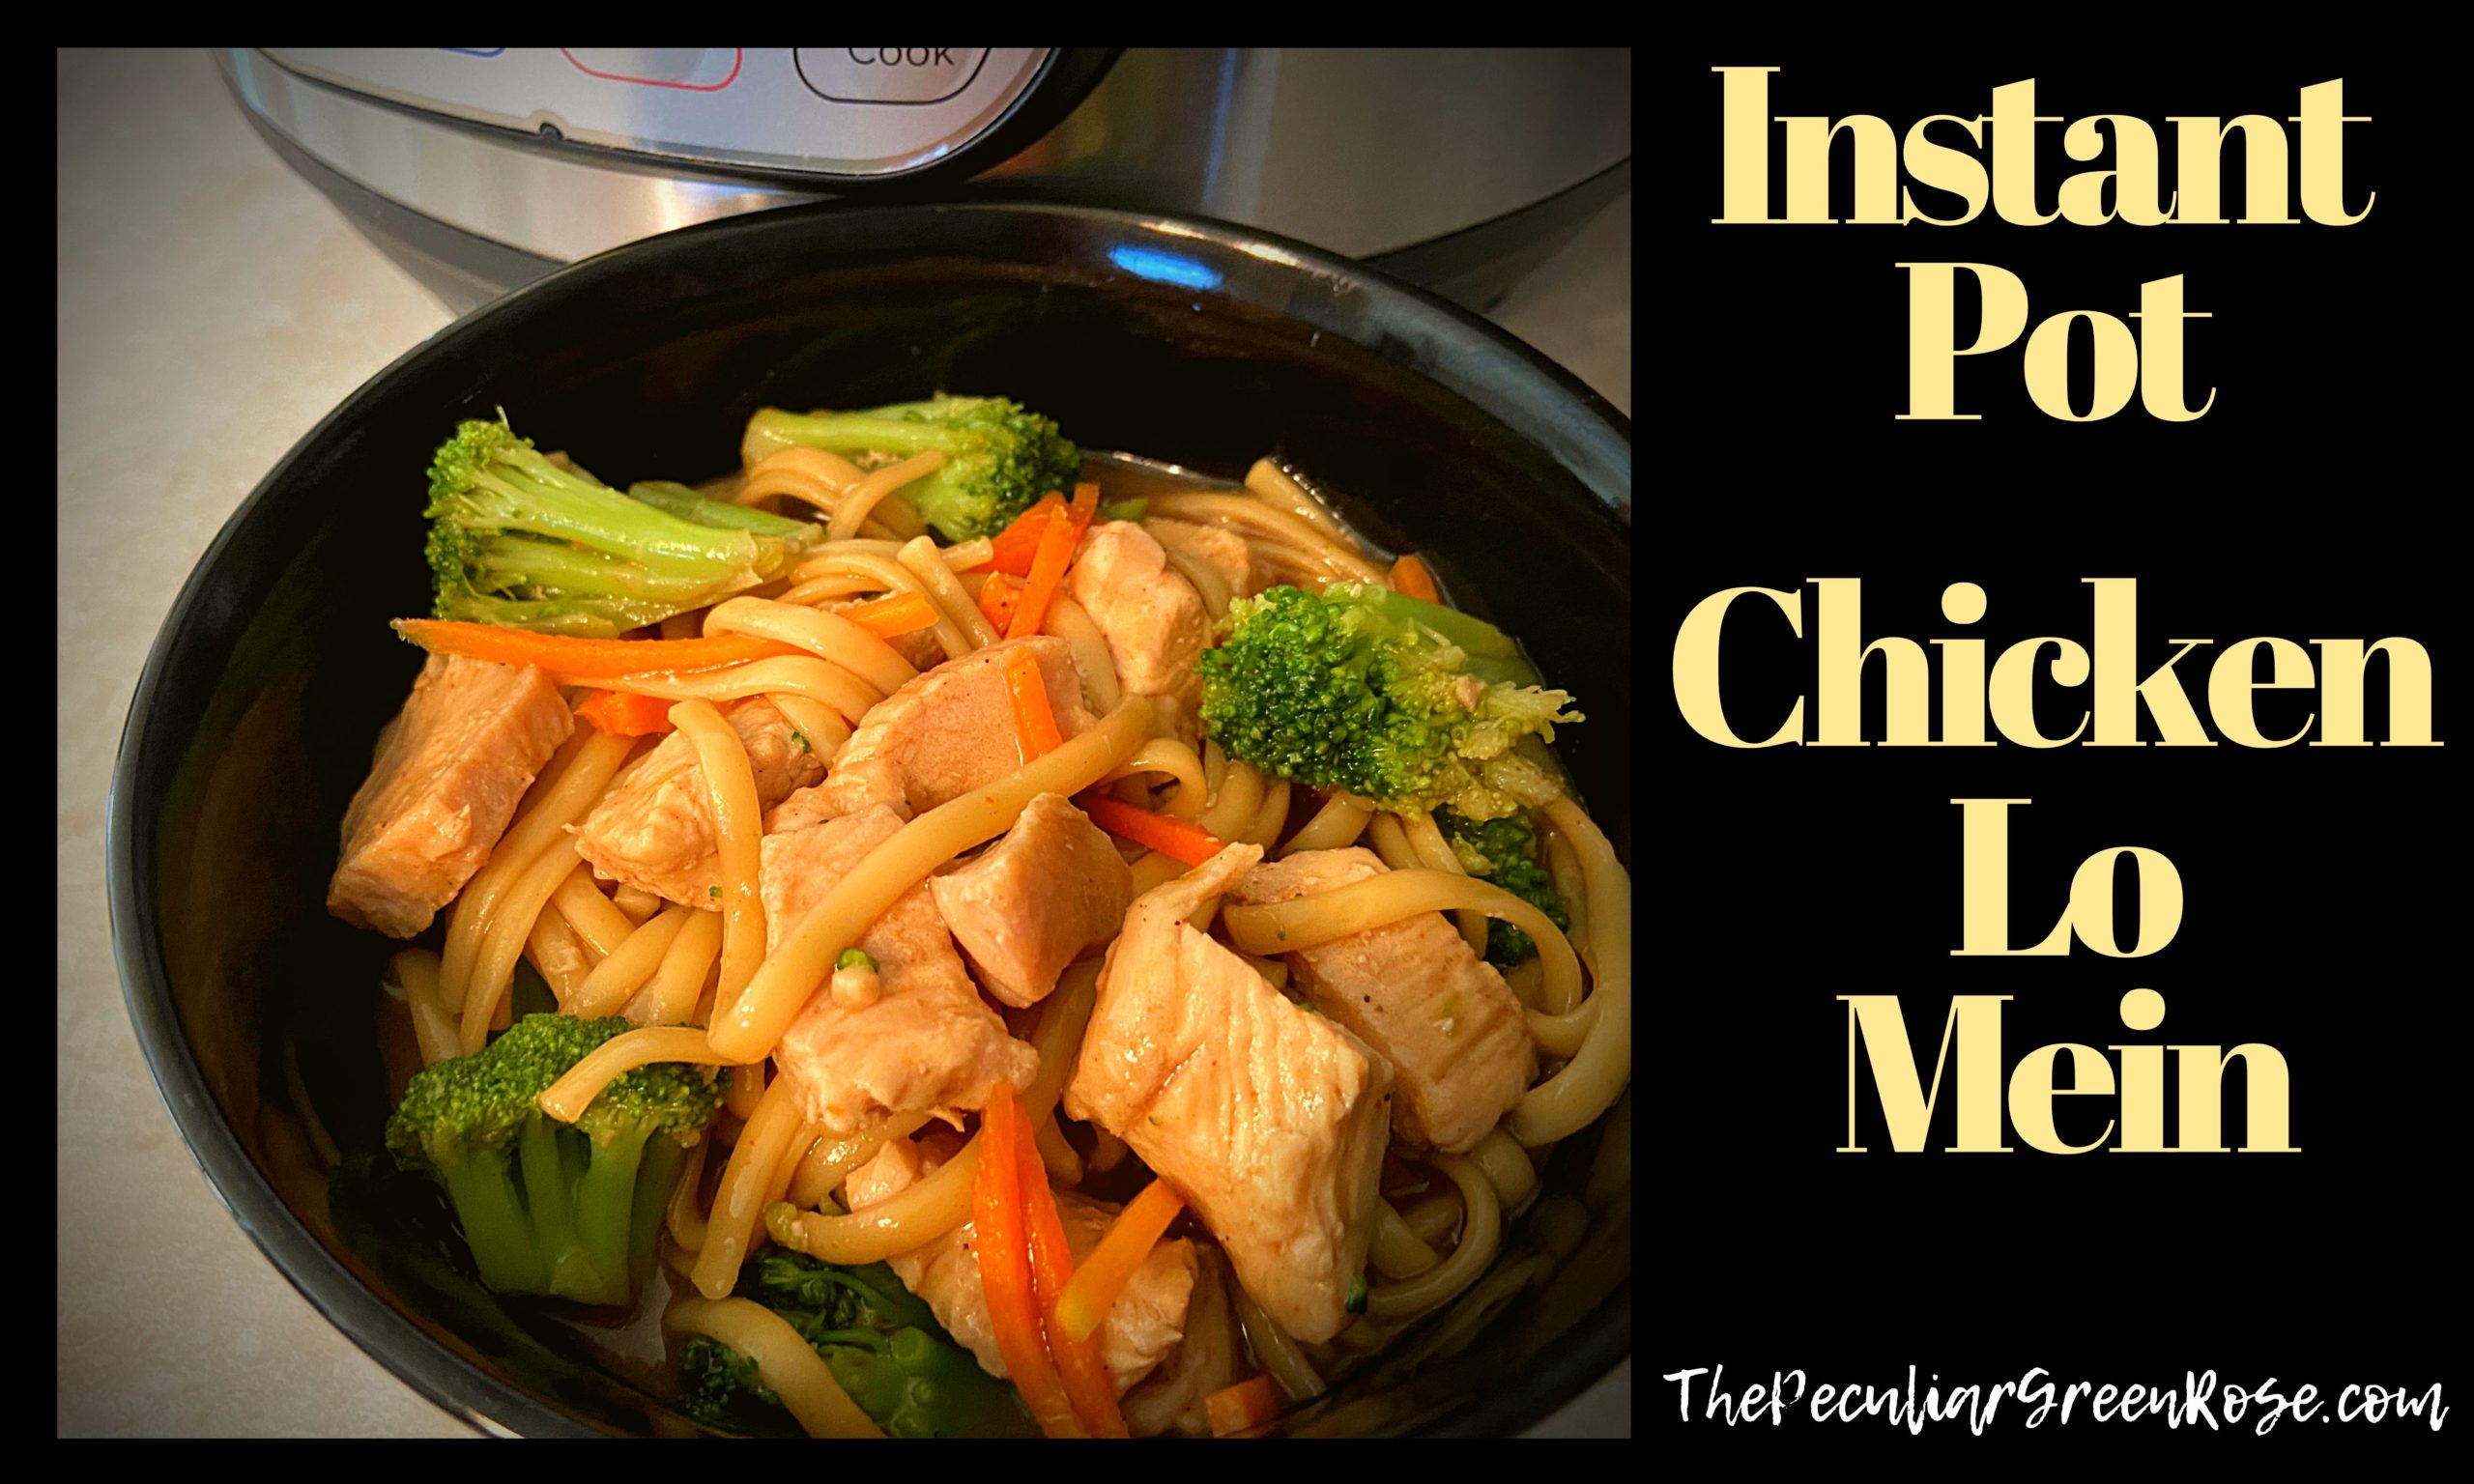 A black bowl filled with instant pot chicken lo mein.